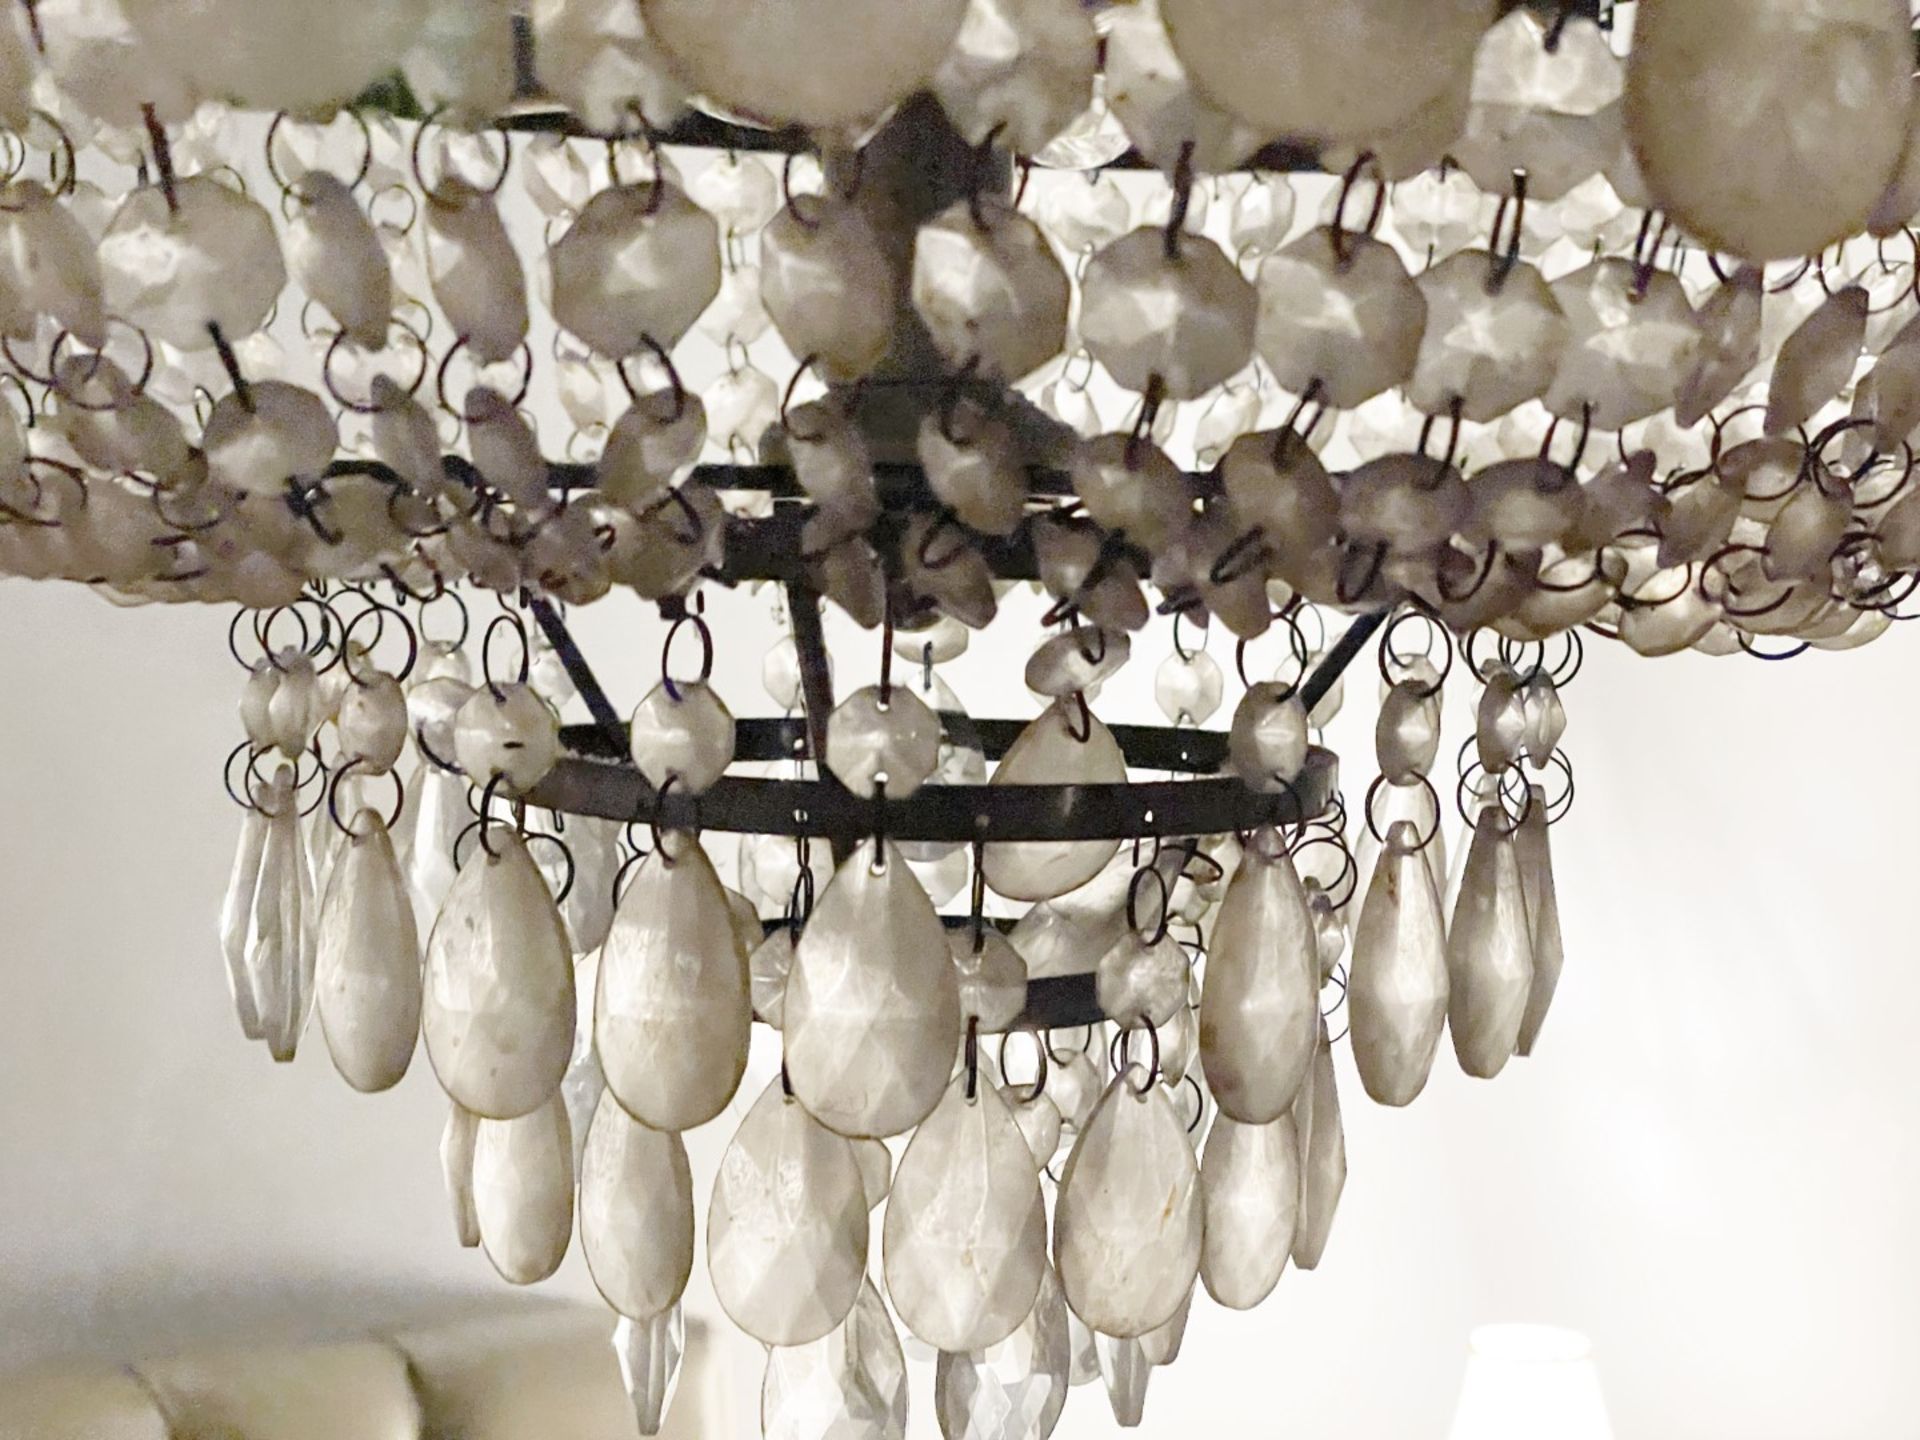 1 x Large Gustavian-style Chandelier Ceiling Pendant Light Adorned with Clear Droplets - Image 8 of 9